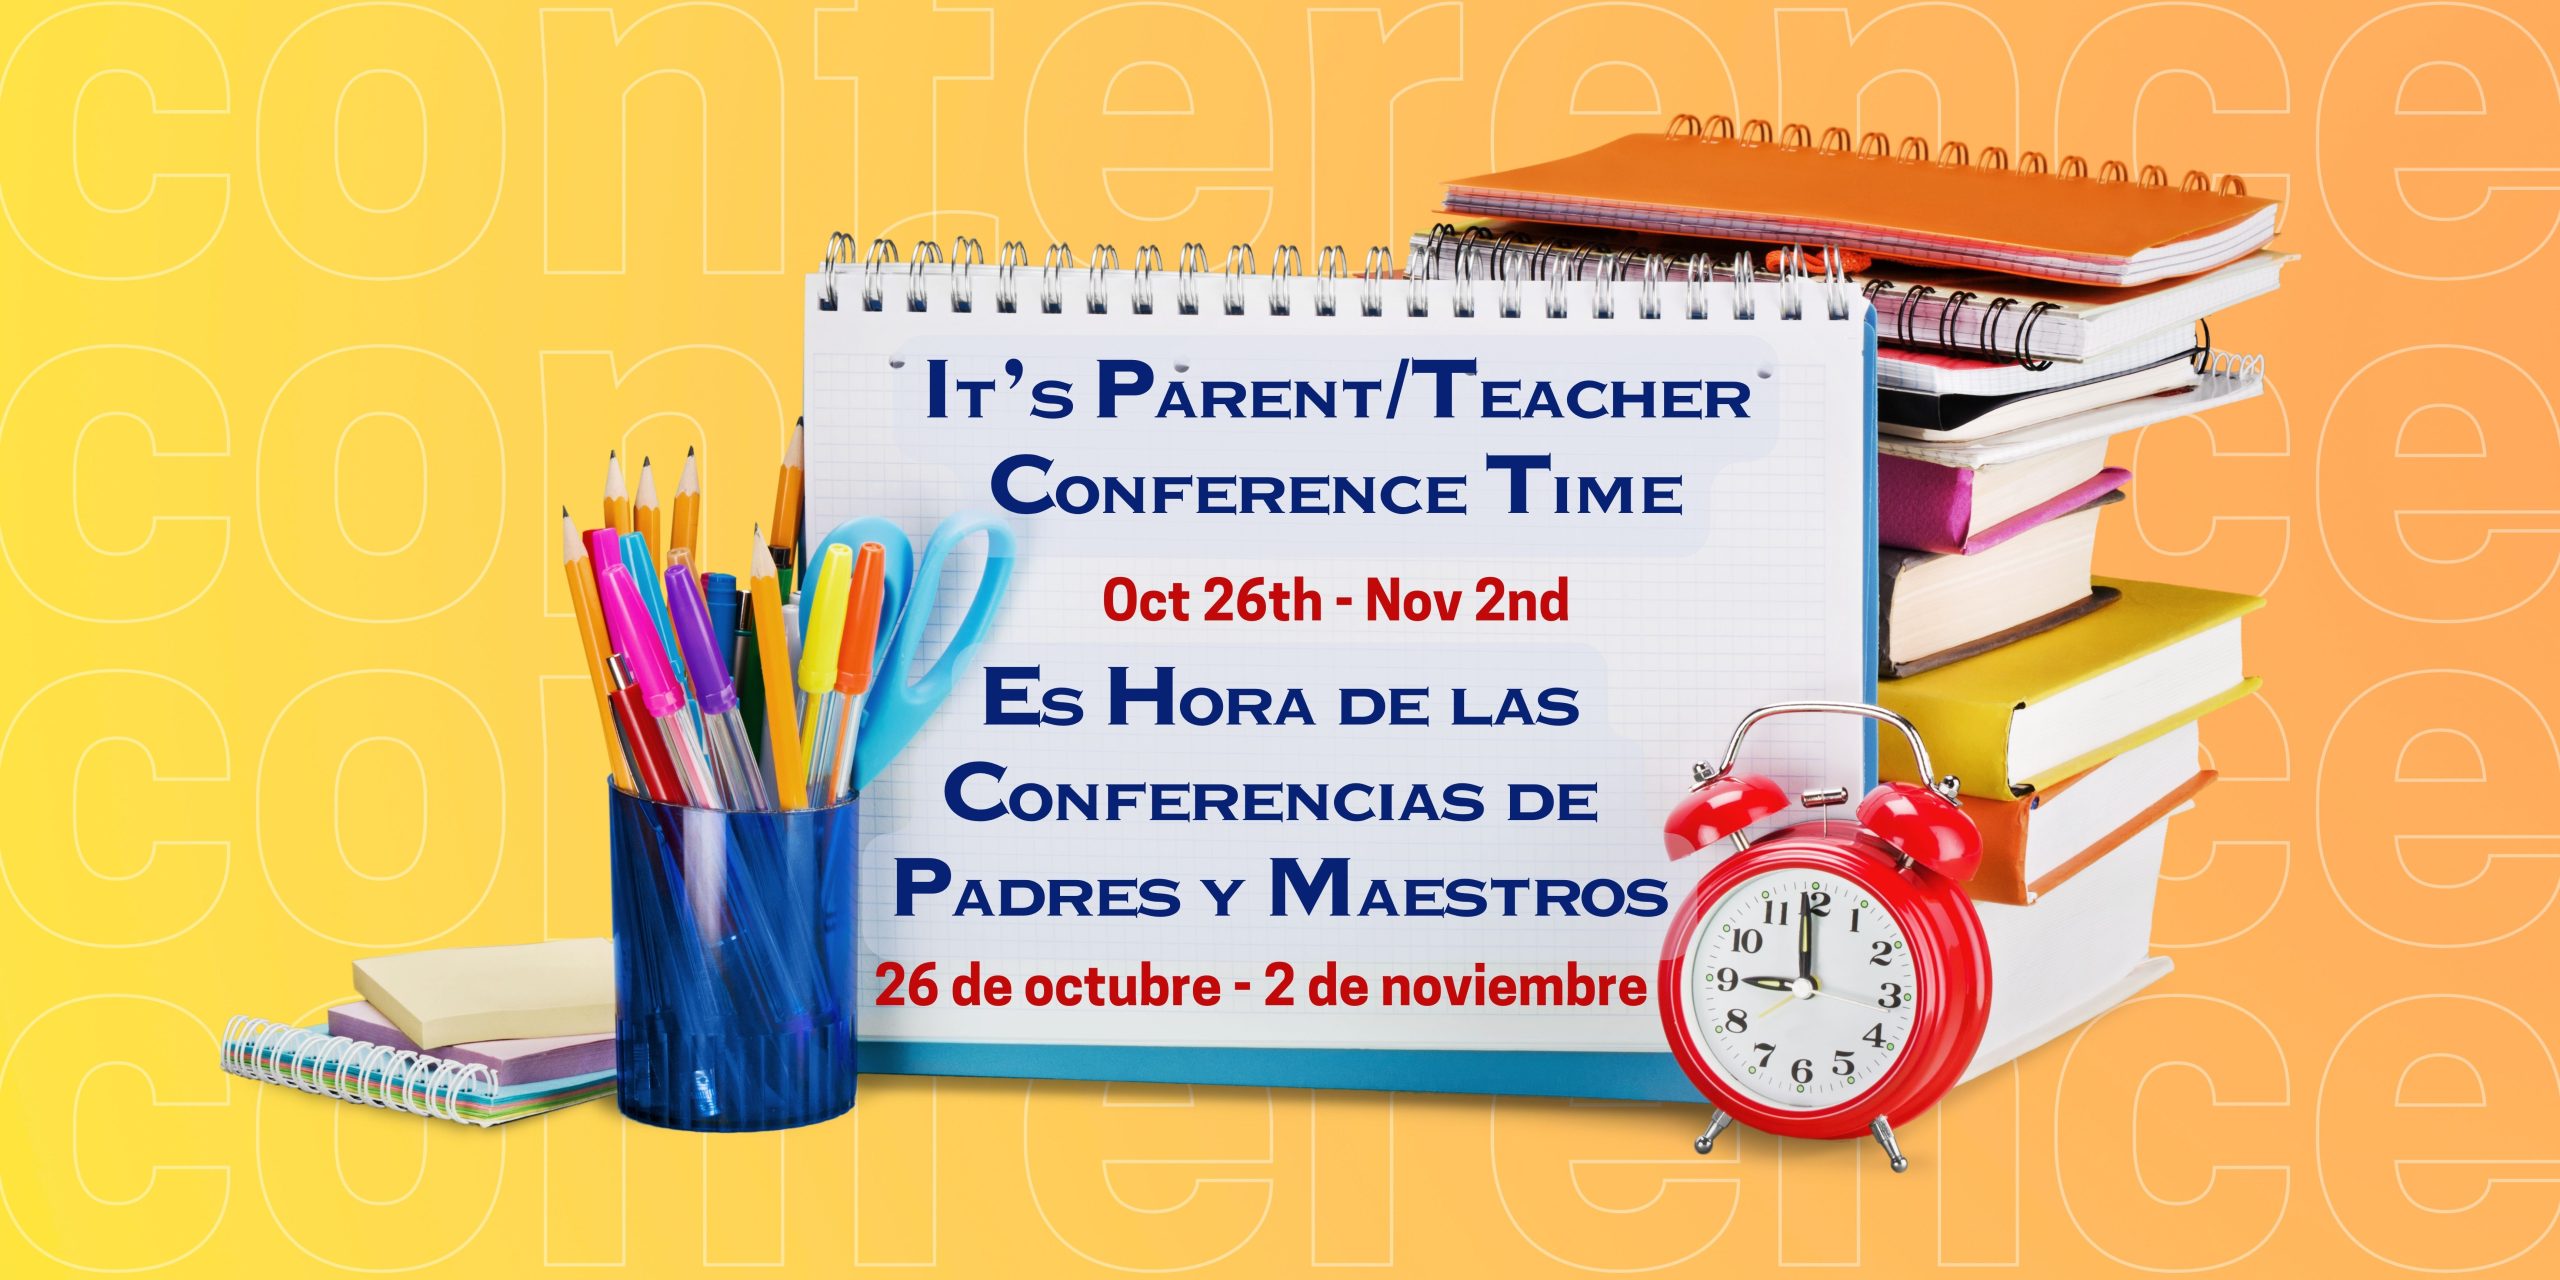 Orange background with images of a penholder full of pens, a red alarm clock, and a stack of notebooks. One notebook is open with red and blue text saying, "It’s Parent/Teacher Conference Time. Oct 26-Nov 2"